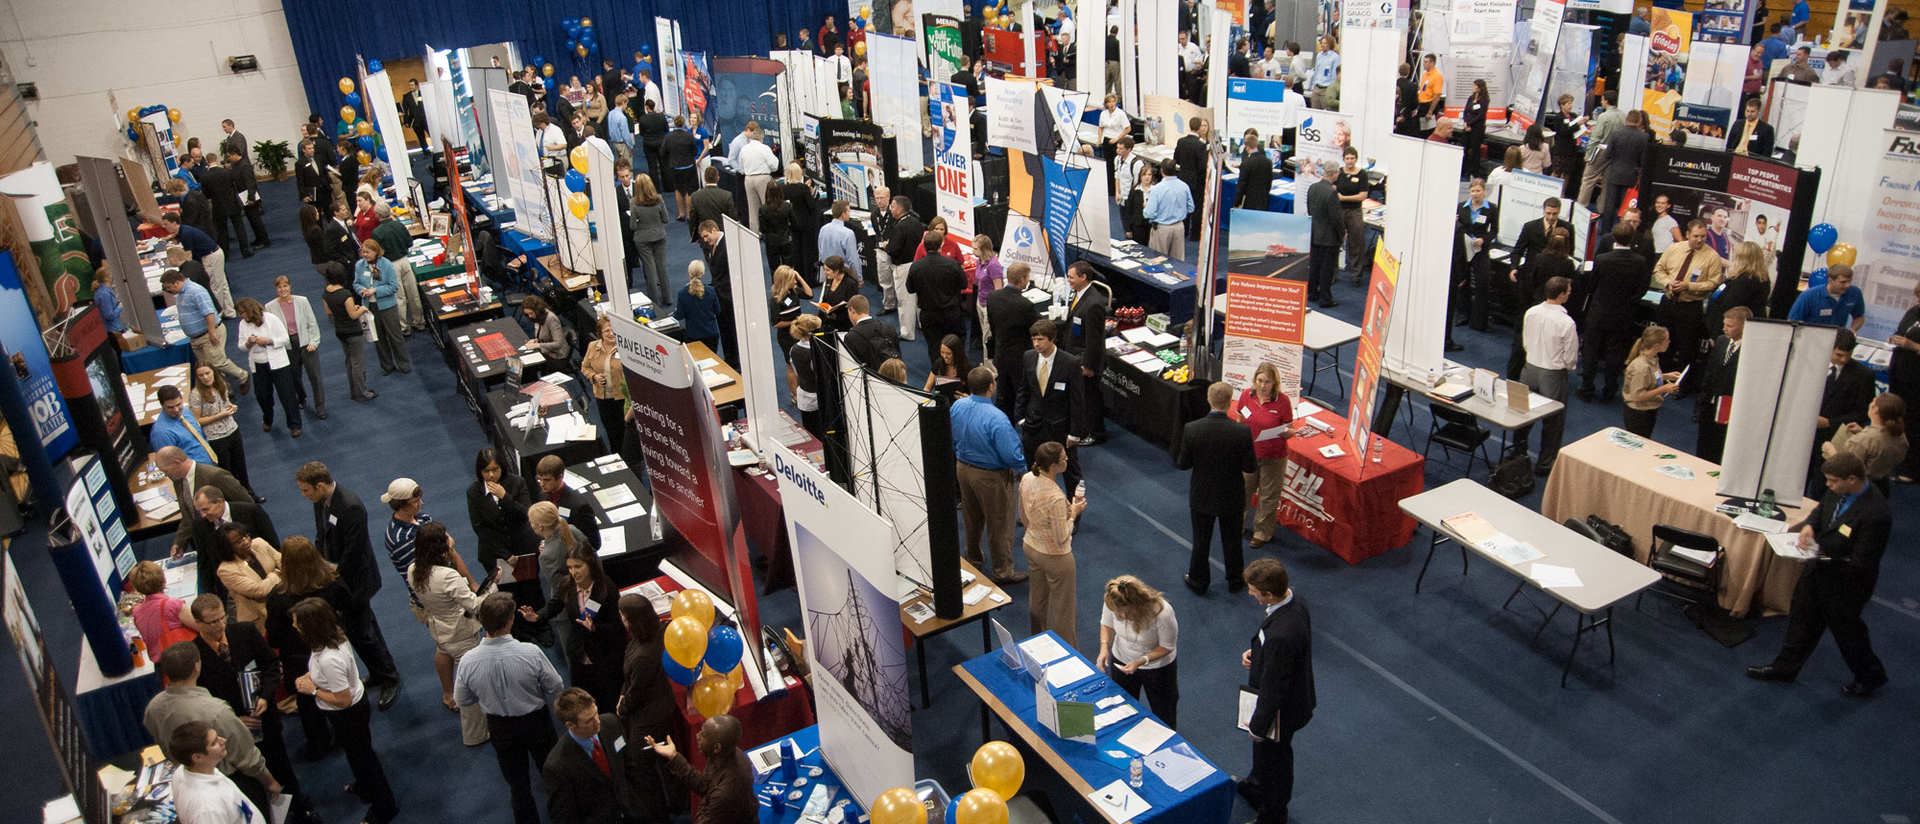 Students and employers at Career Conference